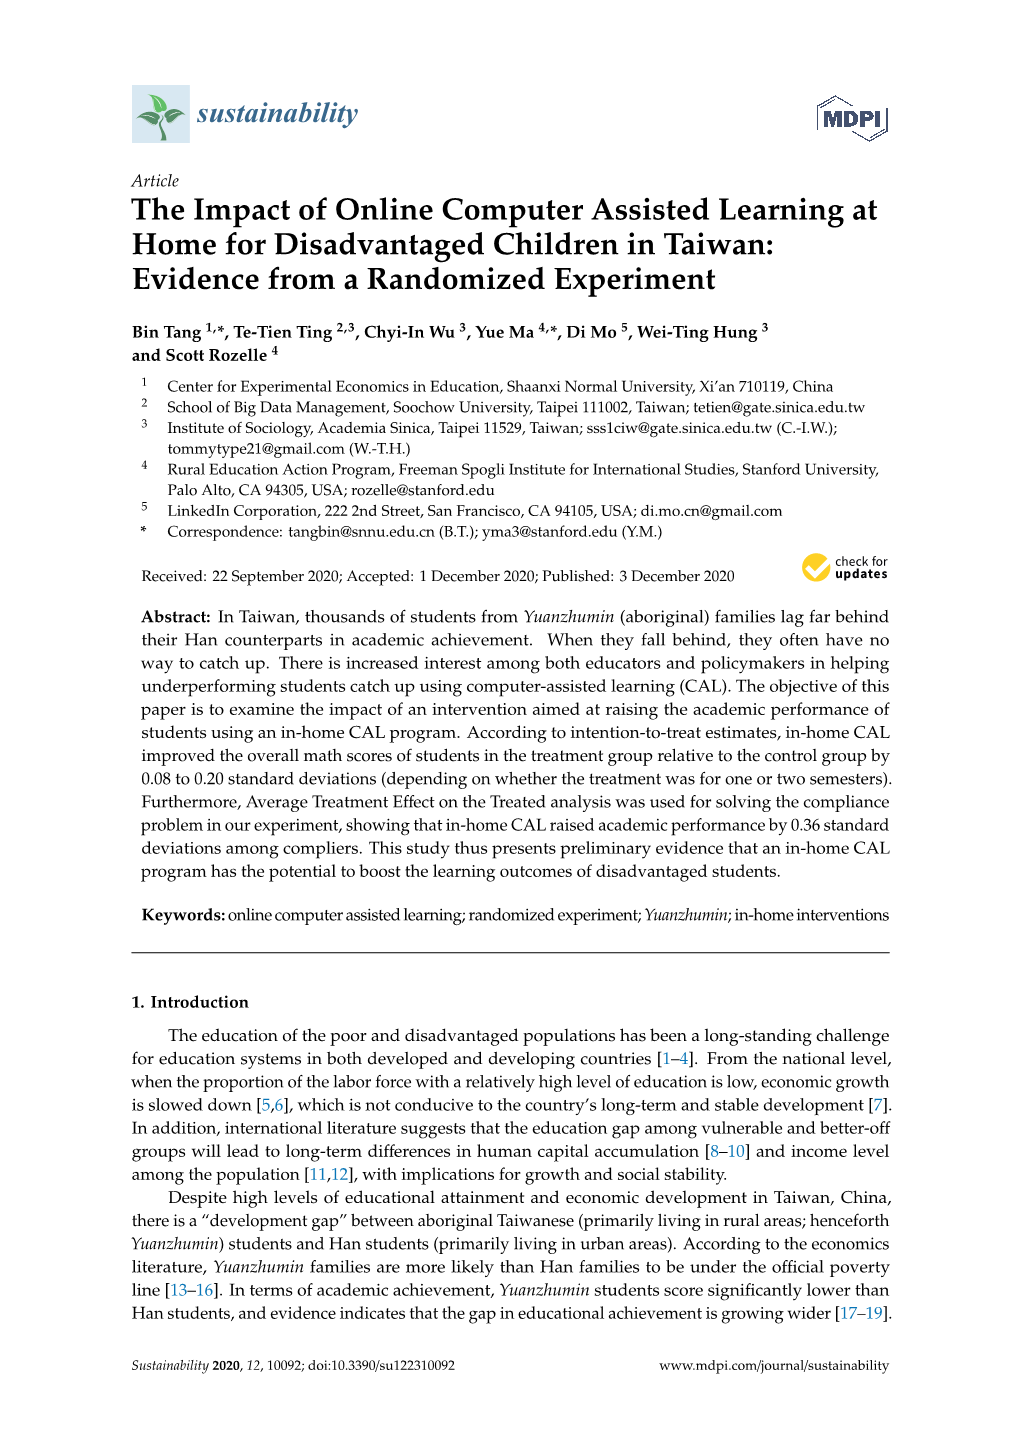 The Impact of Online Computer Assisted Learning at Home for Disadvantaged Children in Taiwan: Evidence from a Randomized Experiment